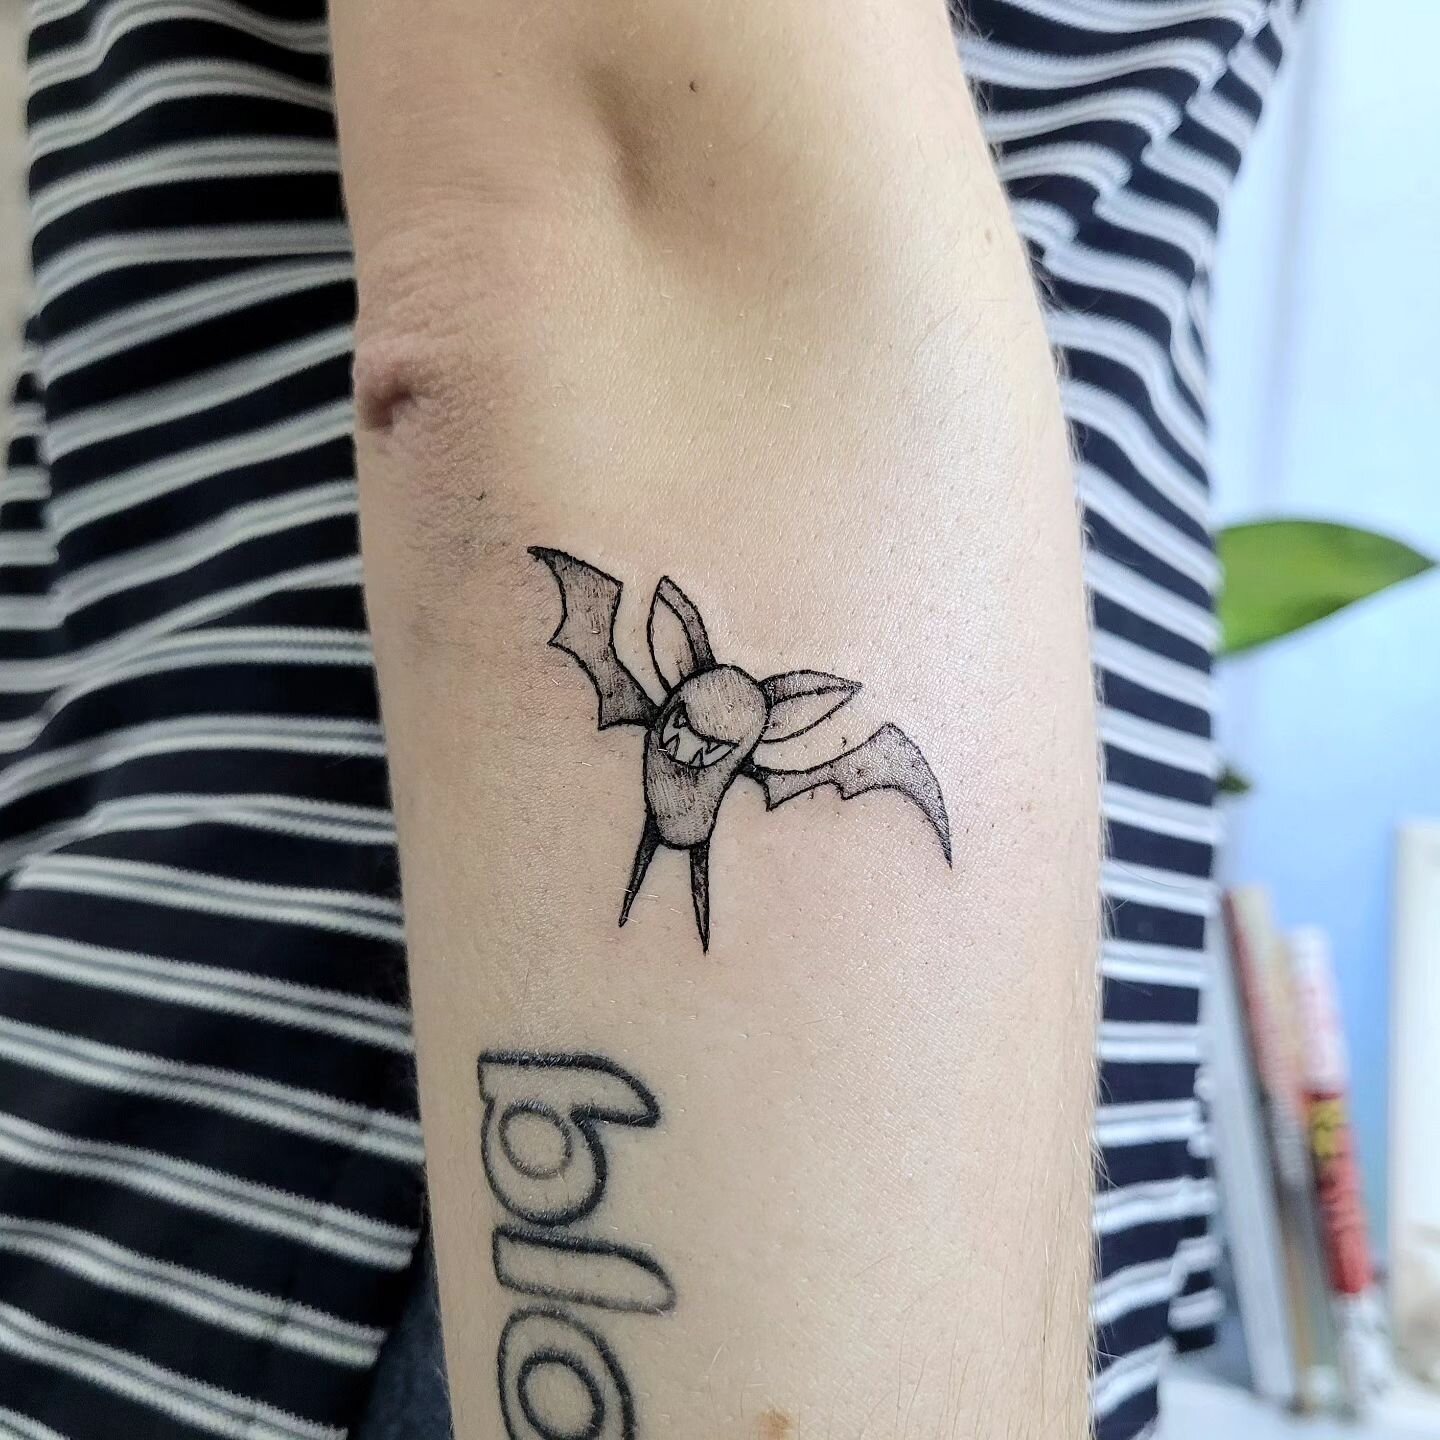 Lil man Zubat for @ash_pren, look how cute he is! 

Grab the pokemon flash while they're discounted! Designs repeatable!

@soulinnhousetattoo